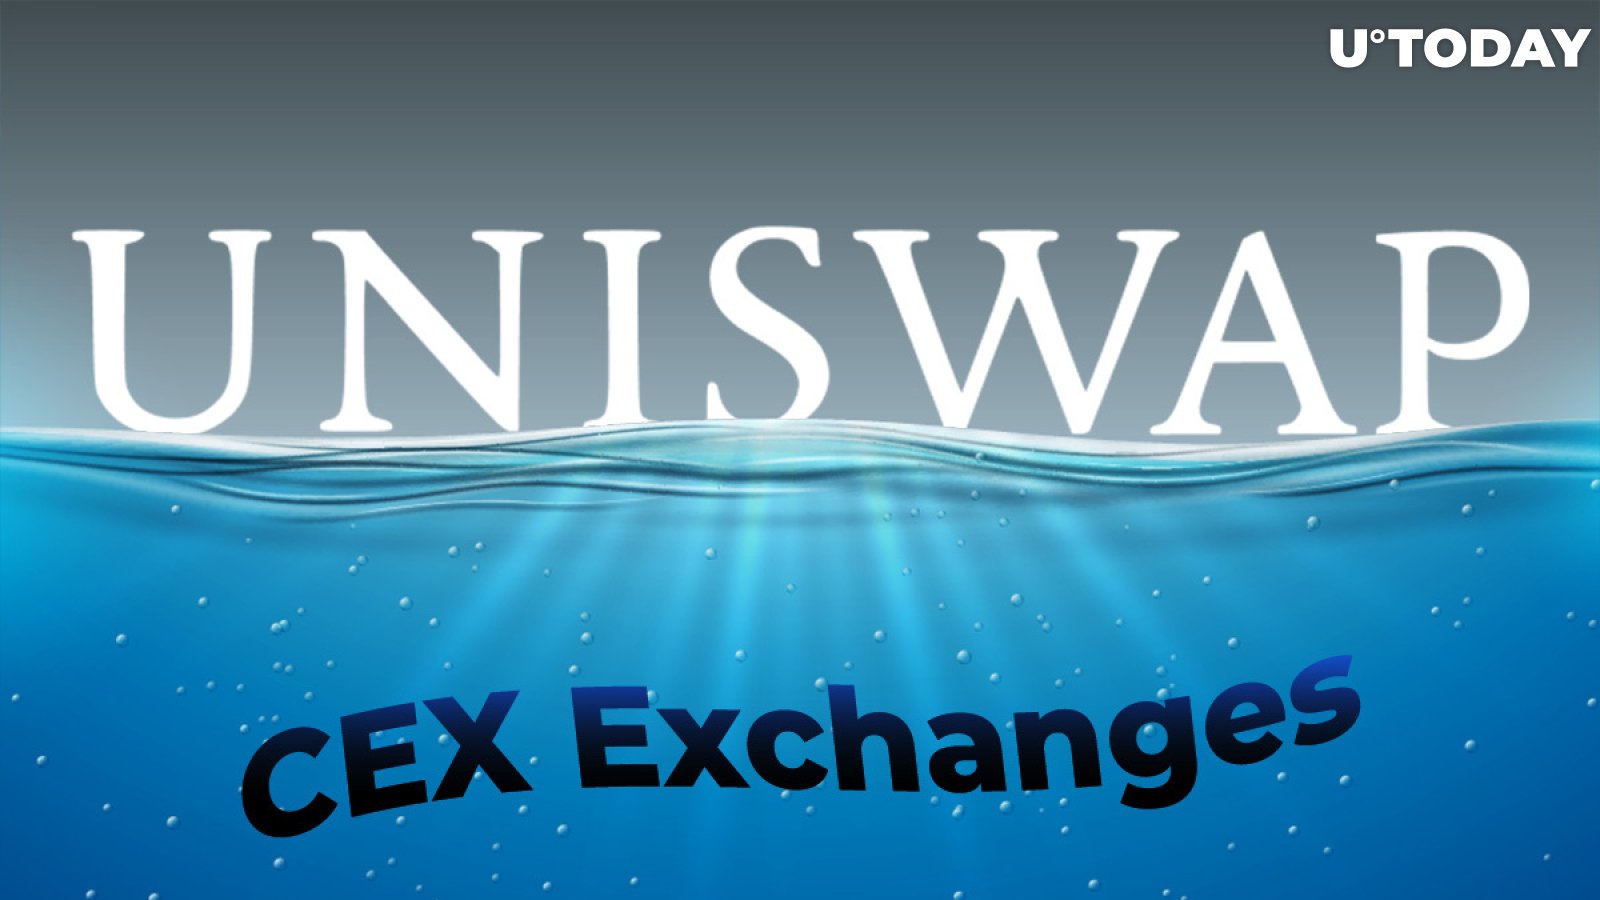 Uniswap Traffic Surged 43% in September While Major CEX Exchanges Faced Big Drop: Study Claims